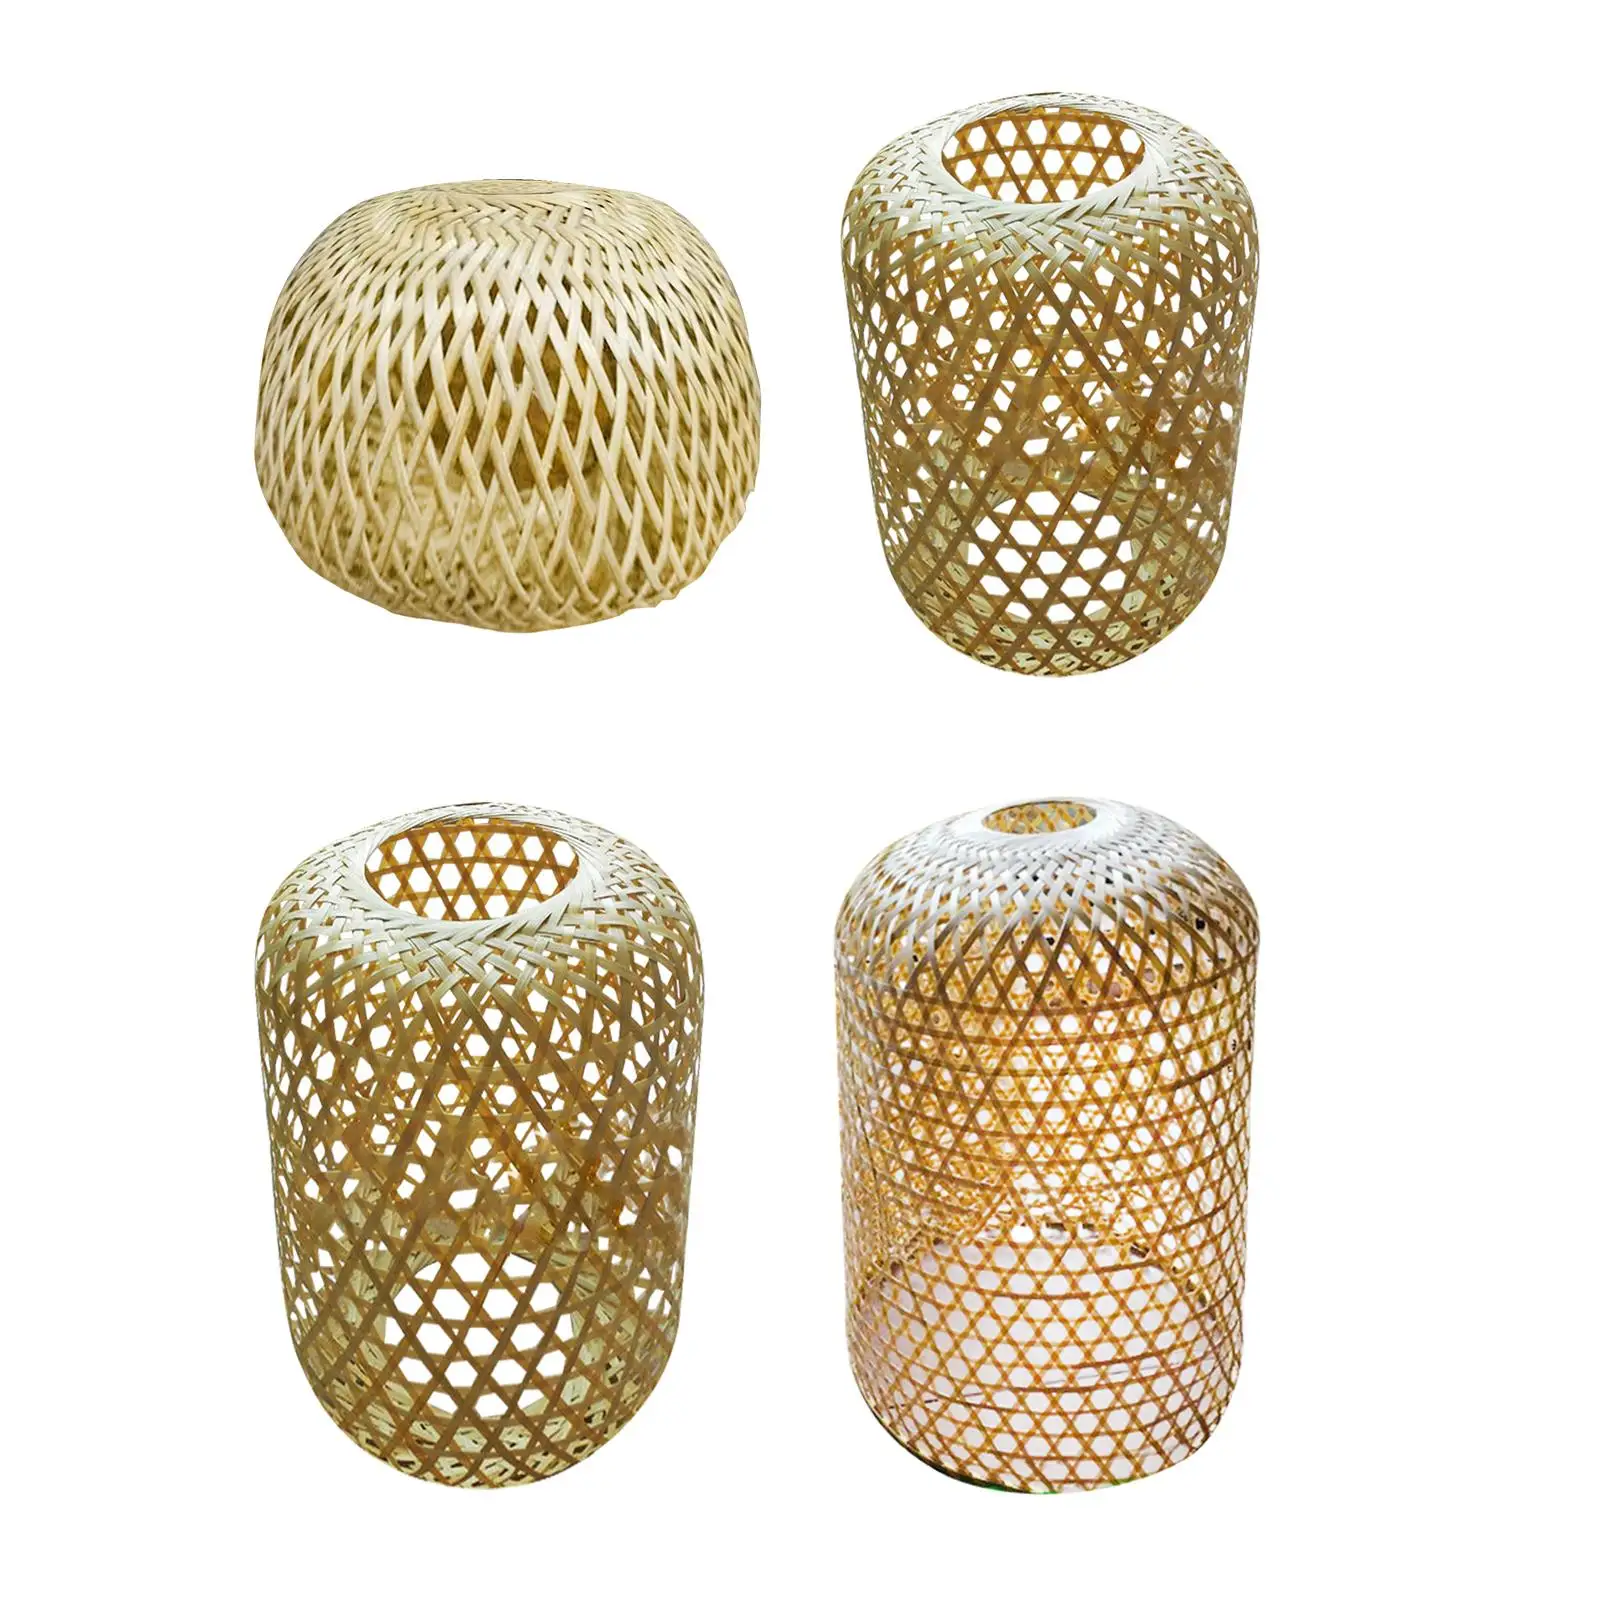 Weaving Bamboo Lamp Shade Ceiling Light Cover Art Crafts Decorative Hanging Lamp Accessory for Cafe Farm Hotel